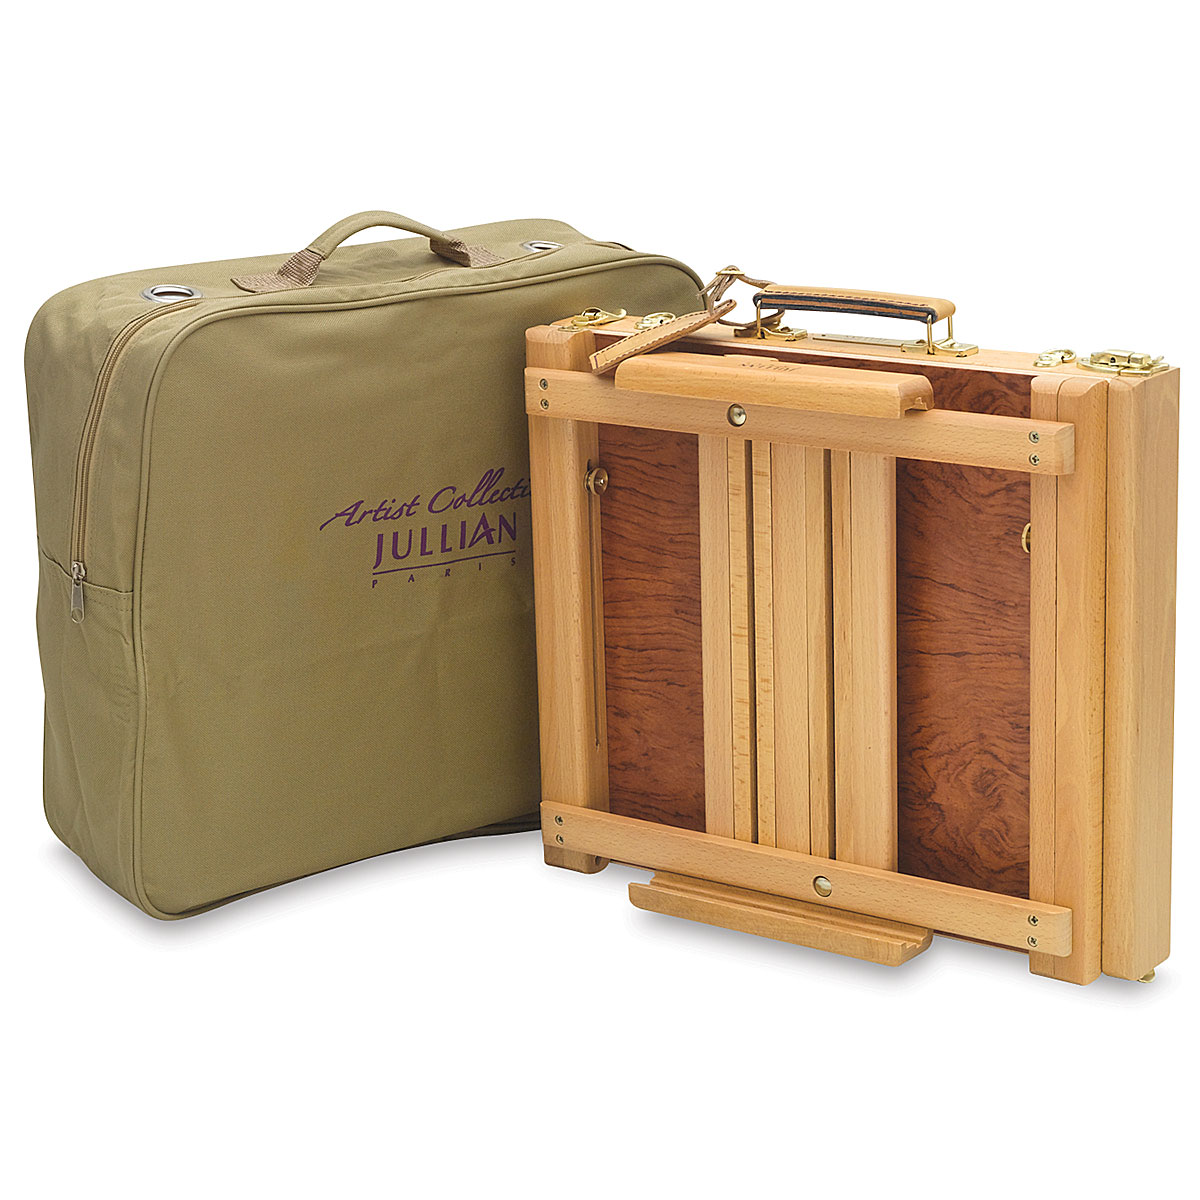 Deluxe Sketch Box & Table Easel by SoHo